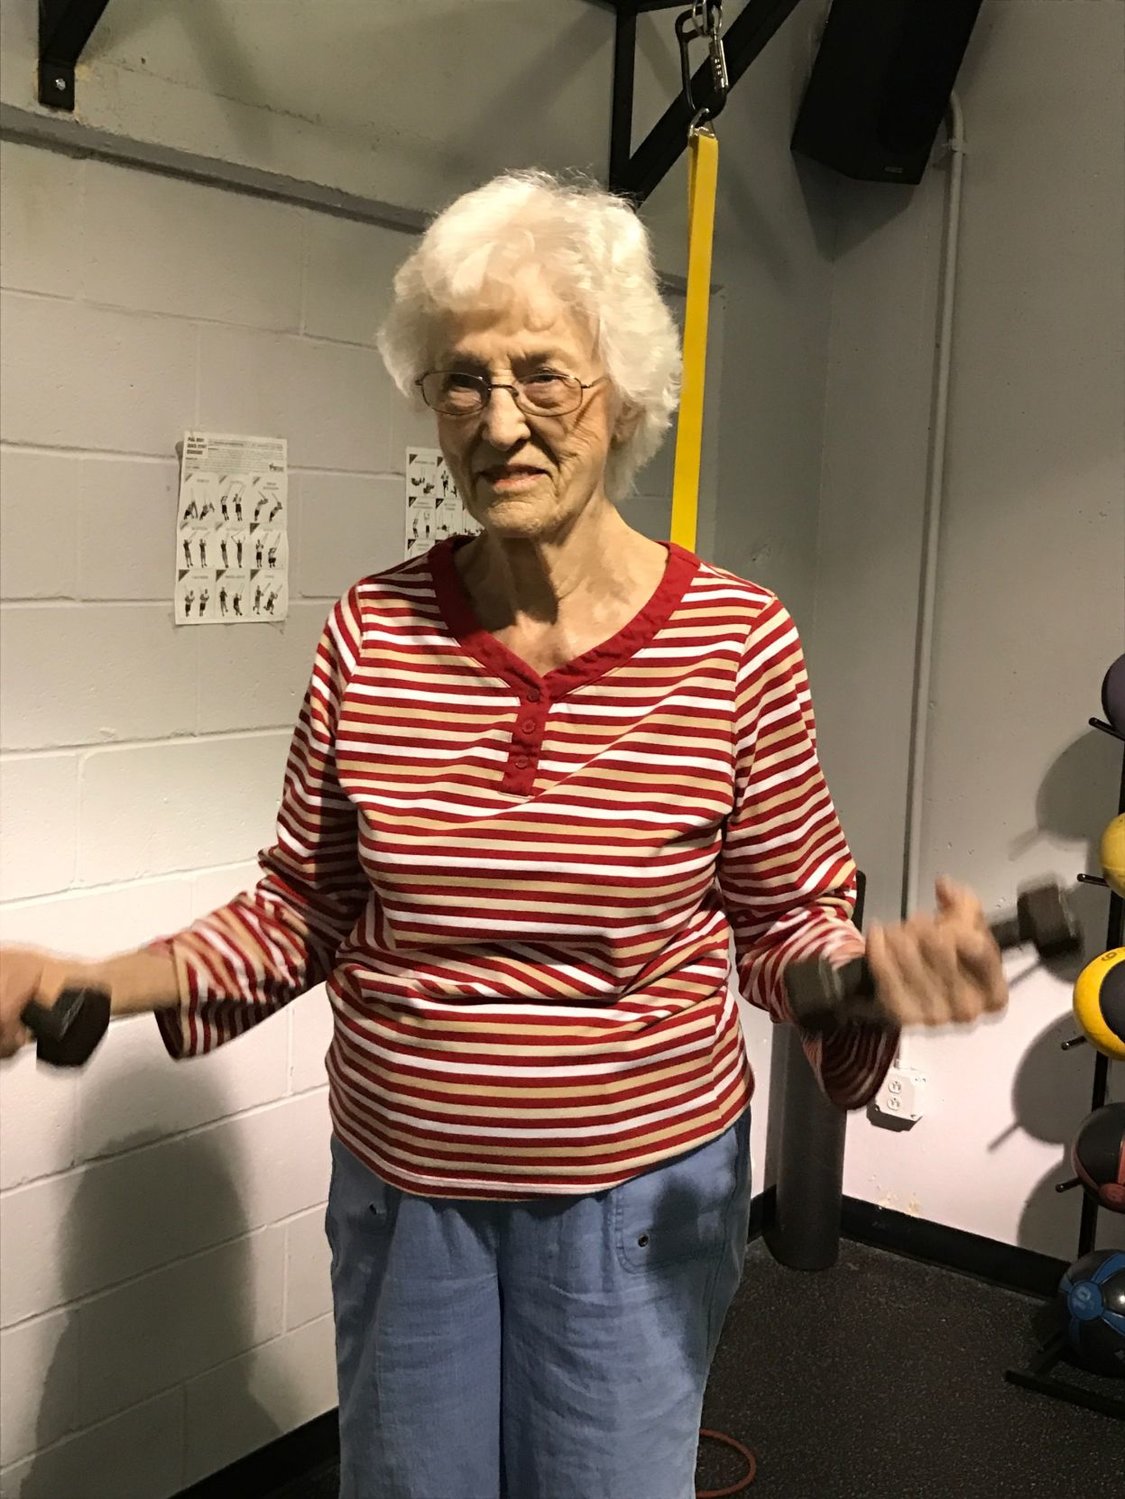 The greatest fear of an older person is falling. Jean Edwards performs exercises while standing on a Bosu Ball. These movements are sharpening Jean’s balance and improving her quality of life. 